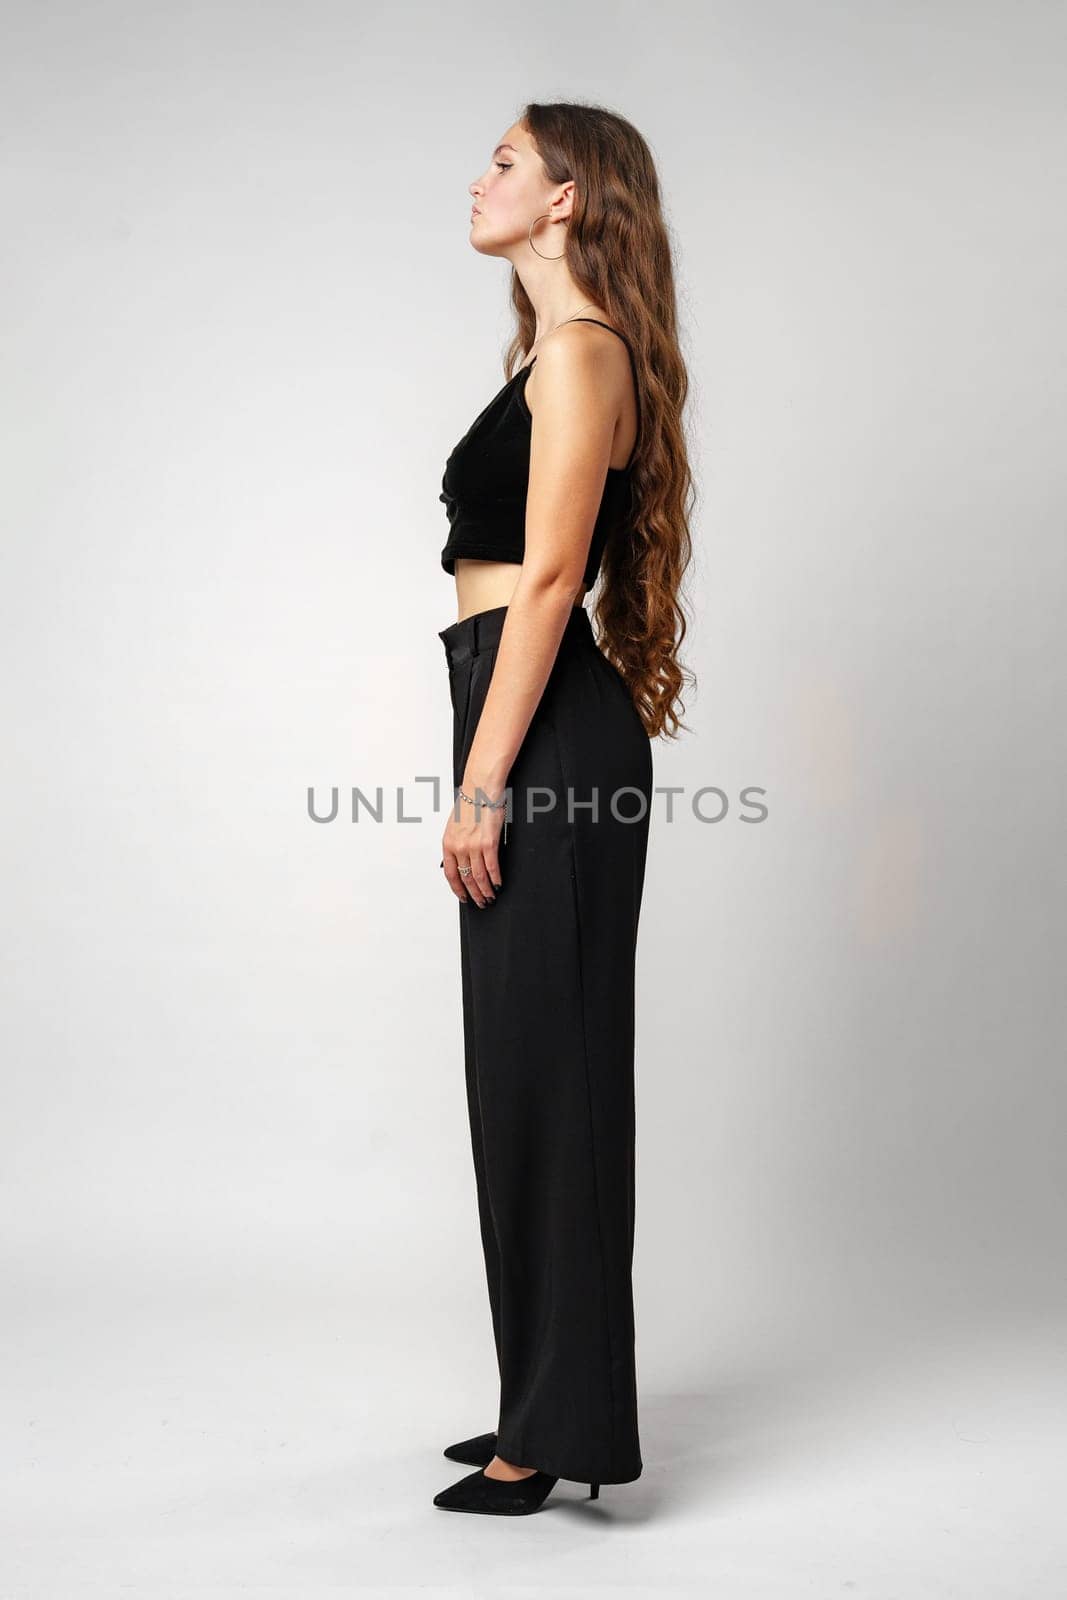 Woman in Black Crop Top and Pants by Fabrikasimf